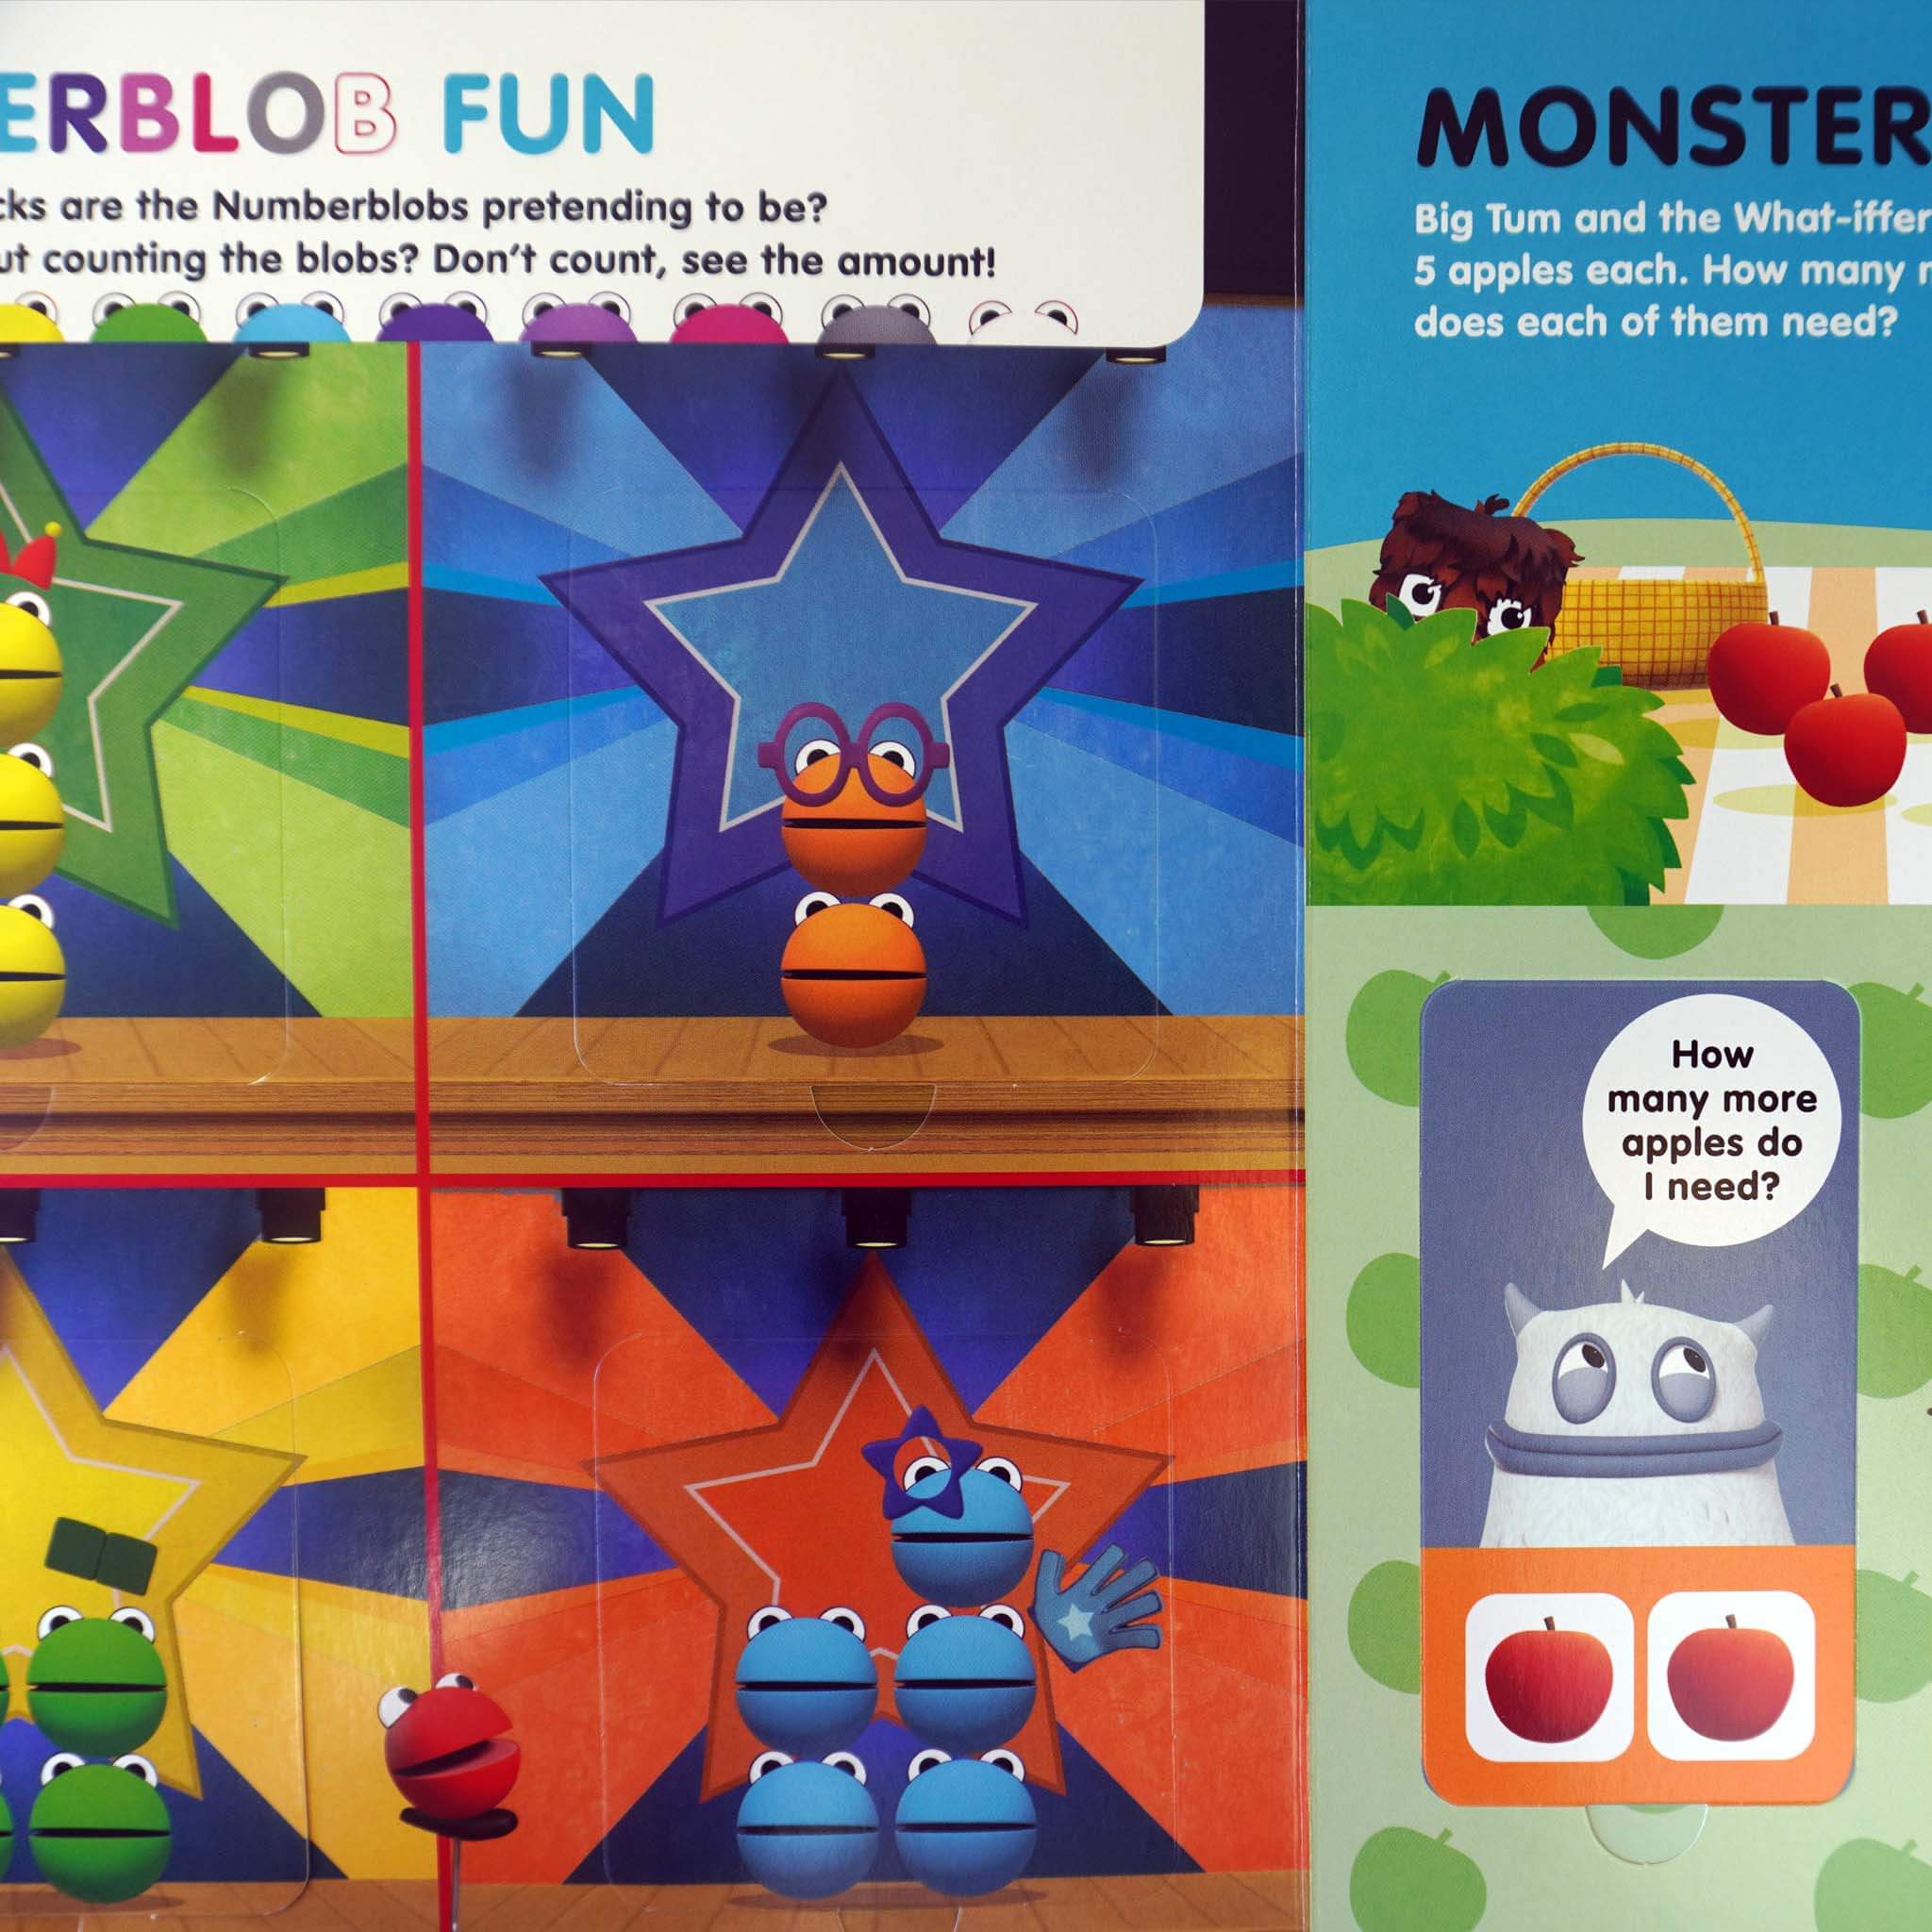 Numberblocks and Alphablocks Lift-the-Flap 5 Books Collection Set By Sweet Cherry Publishing - Ages 3 years and up - Board Book